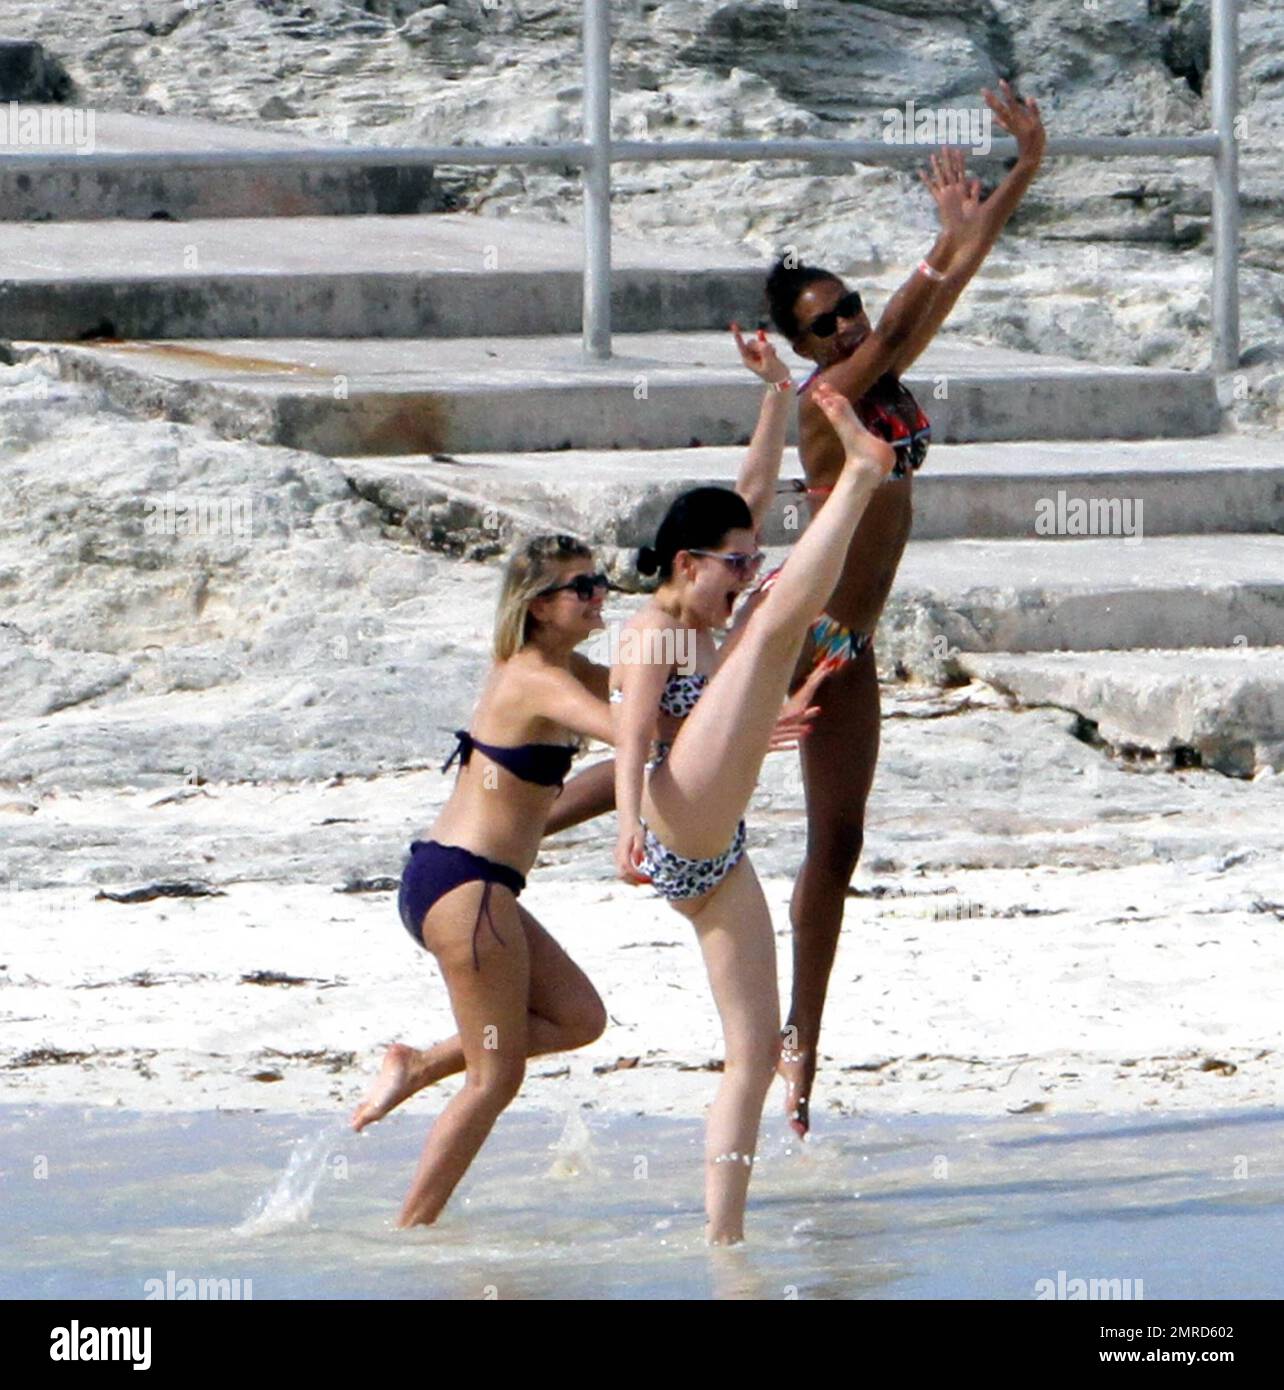 Productie Natte sneeuw vis EXCLUSIVE!! British singer Jessie J reveals her incredible bikini body and  tattoos during a Caribbean break. Jessie wore a colorful bikini as she  played in the water-park and took a walk on